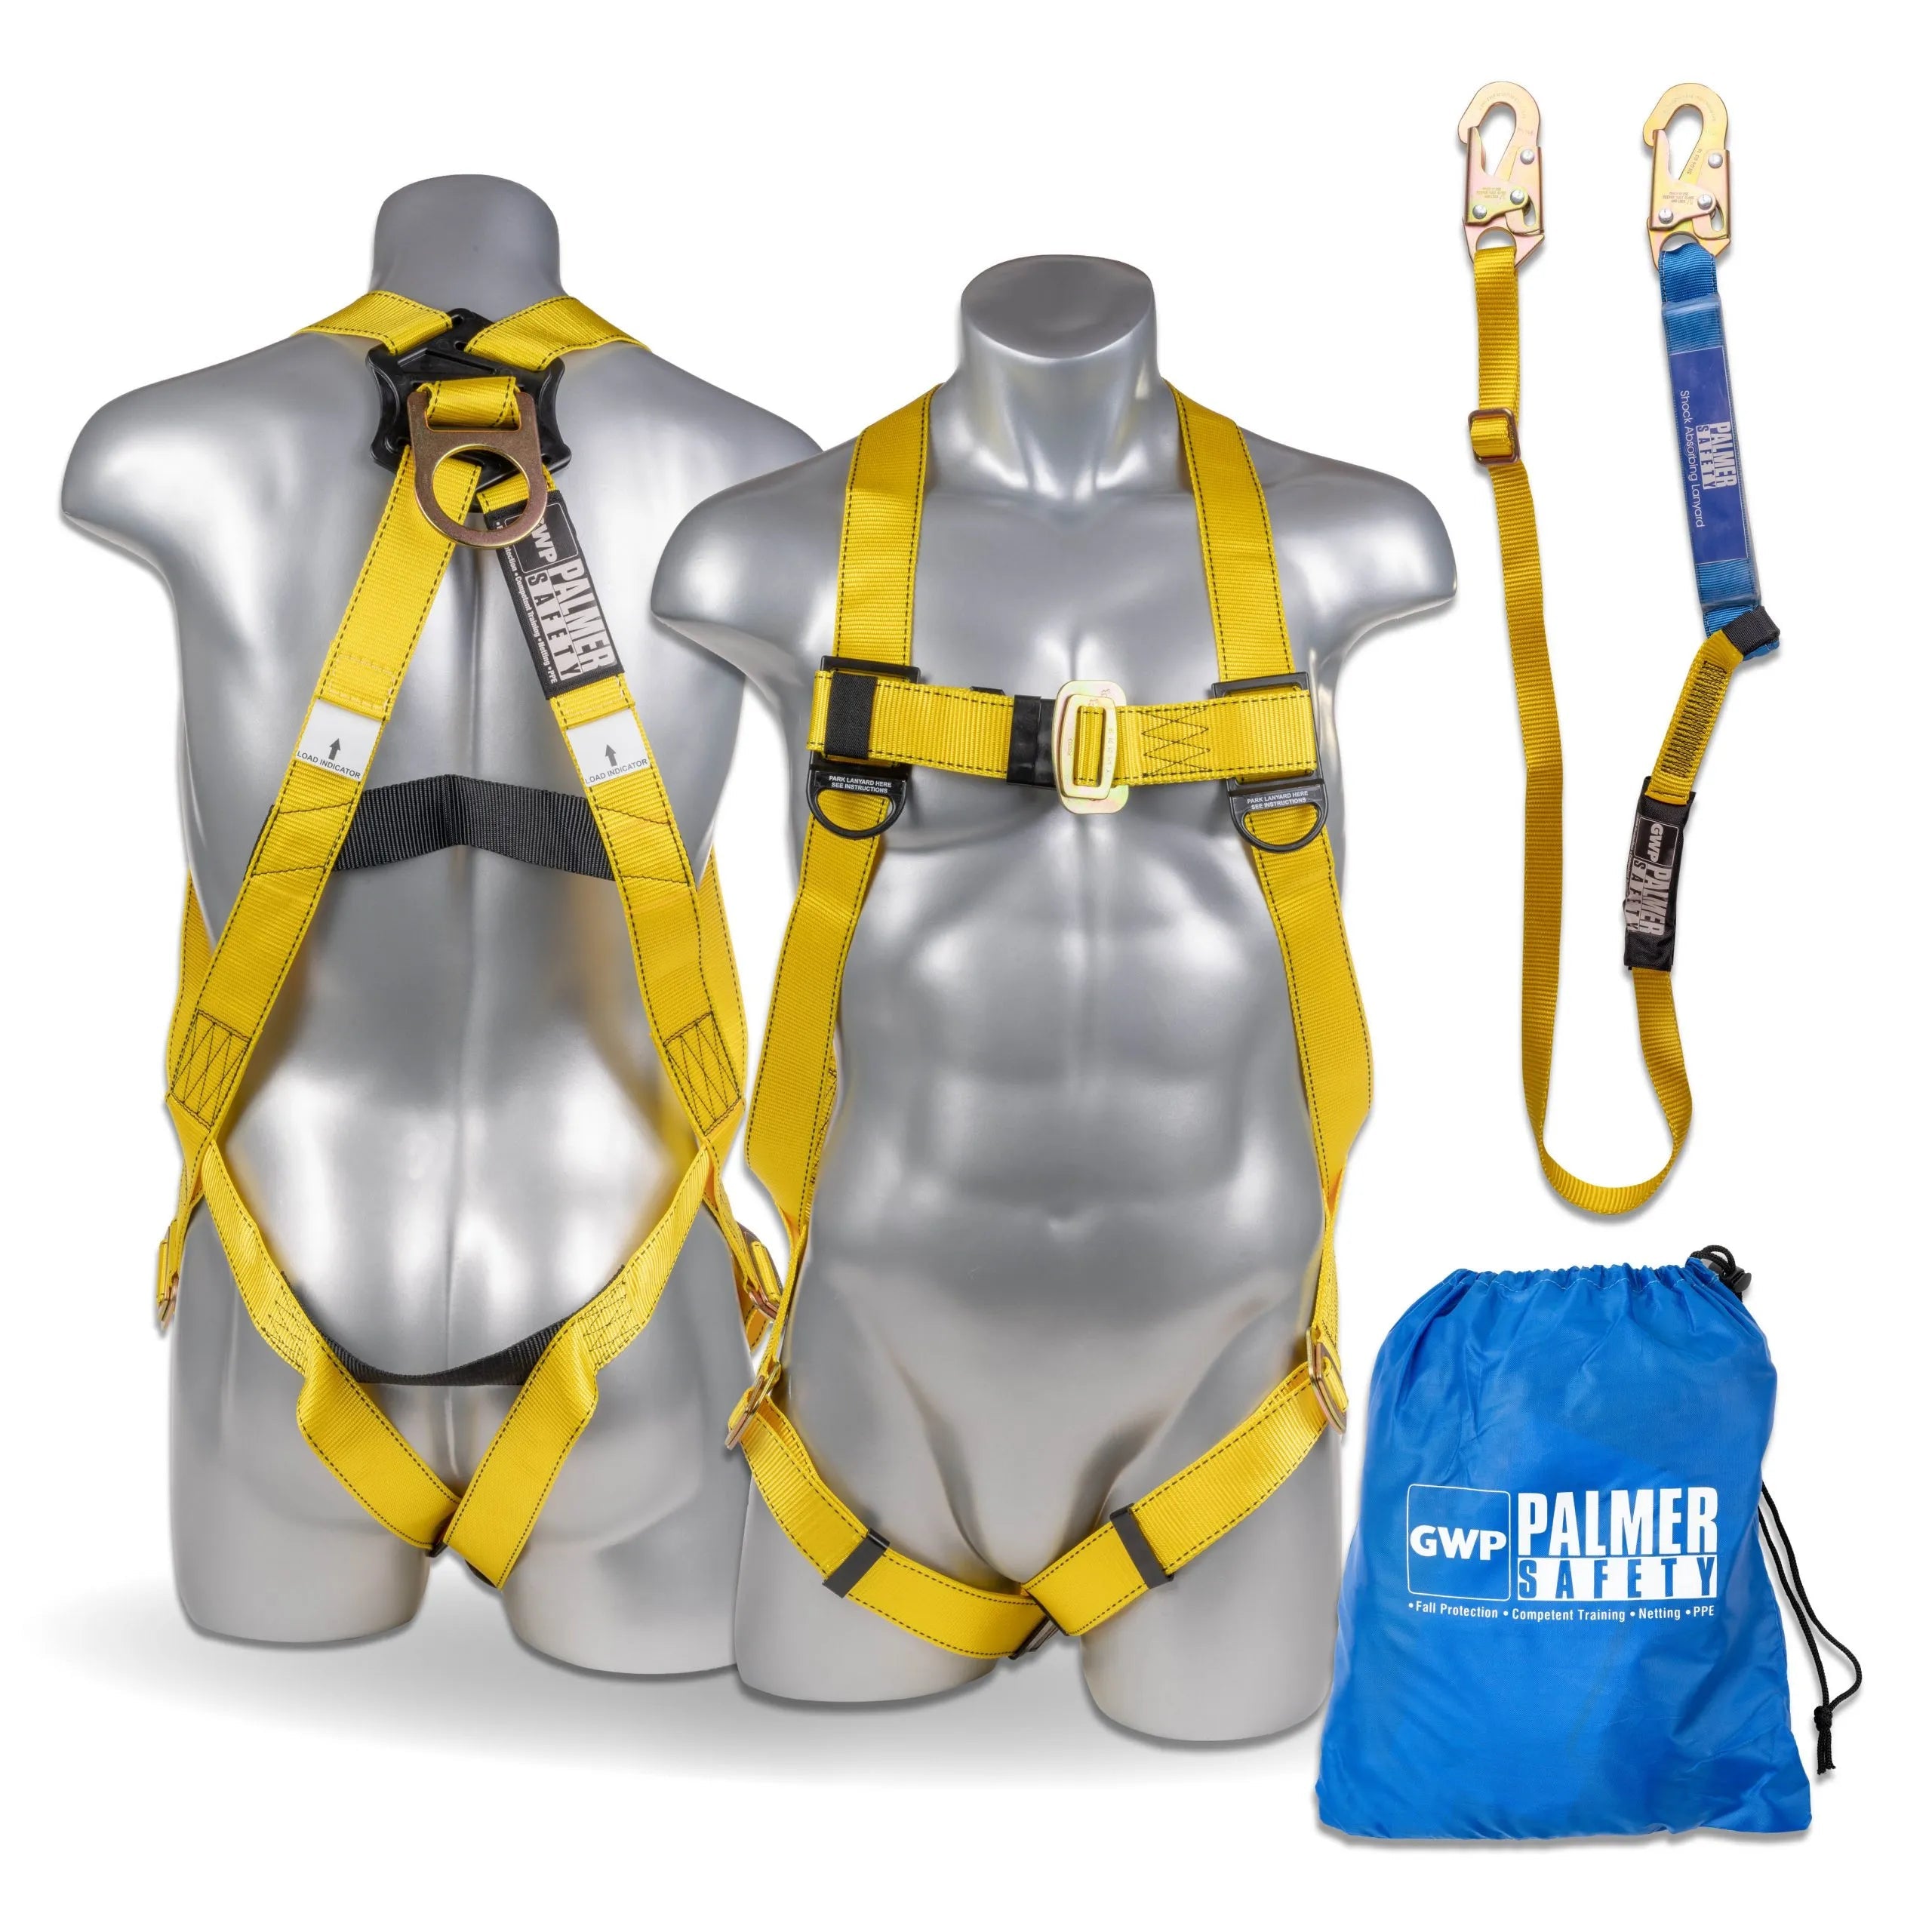 Fall Protection Full Body Harness with Shock Absorbing Lanyard